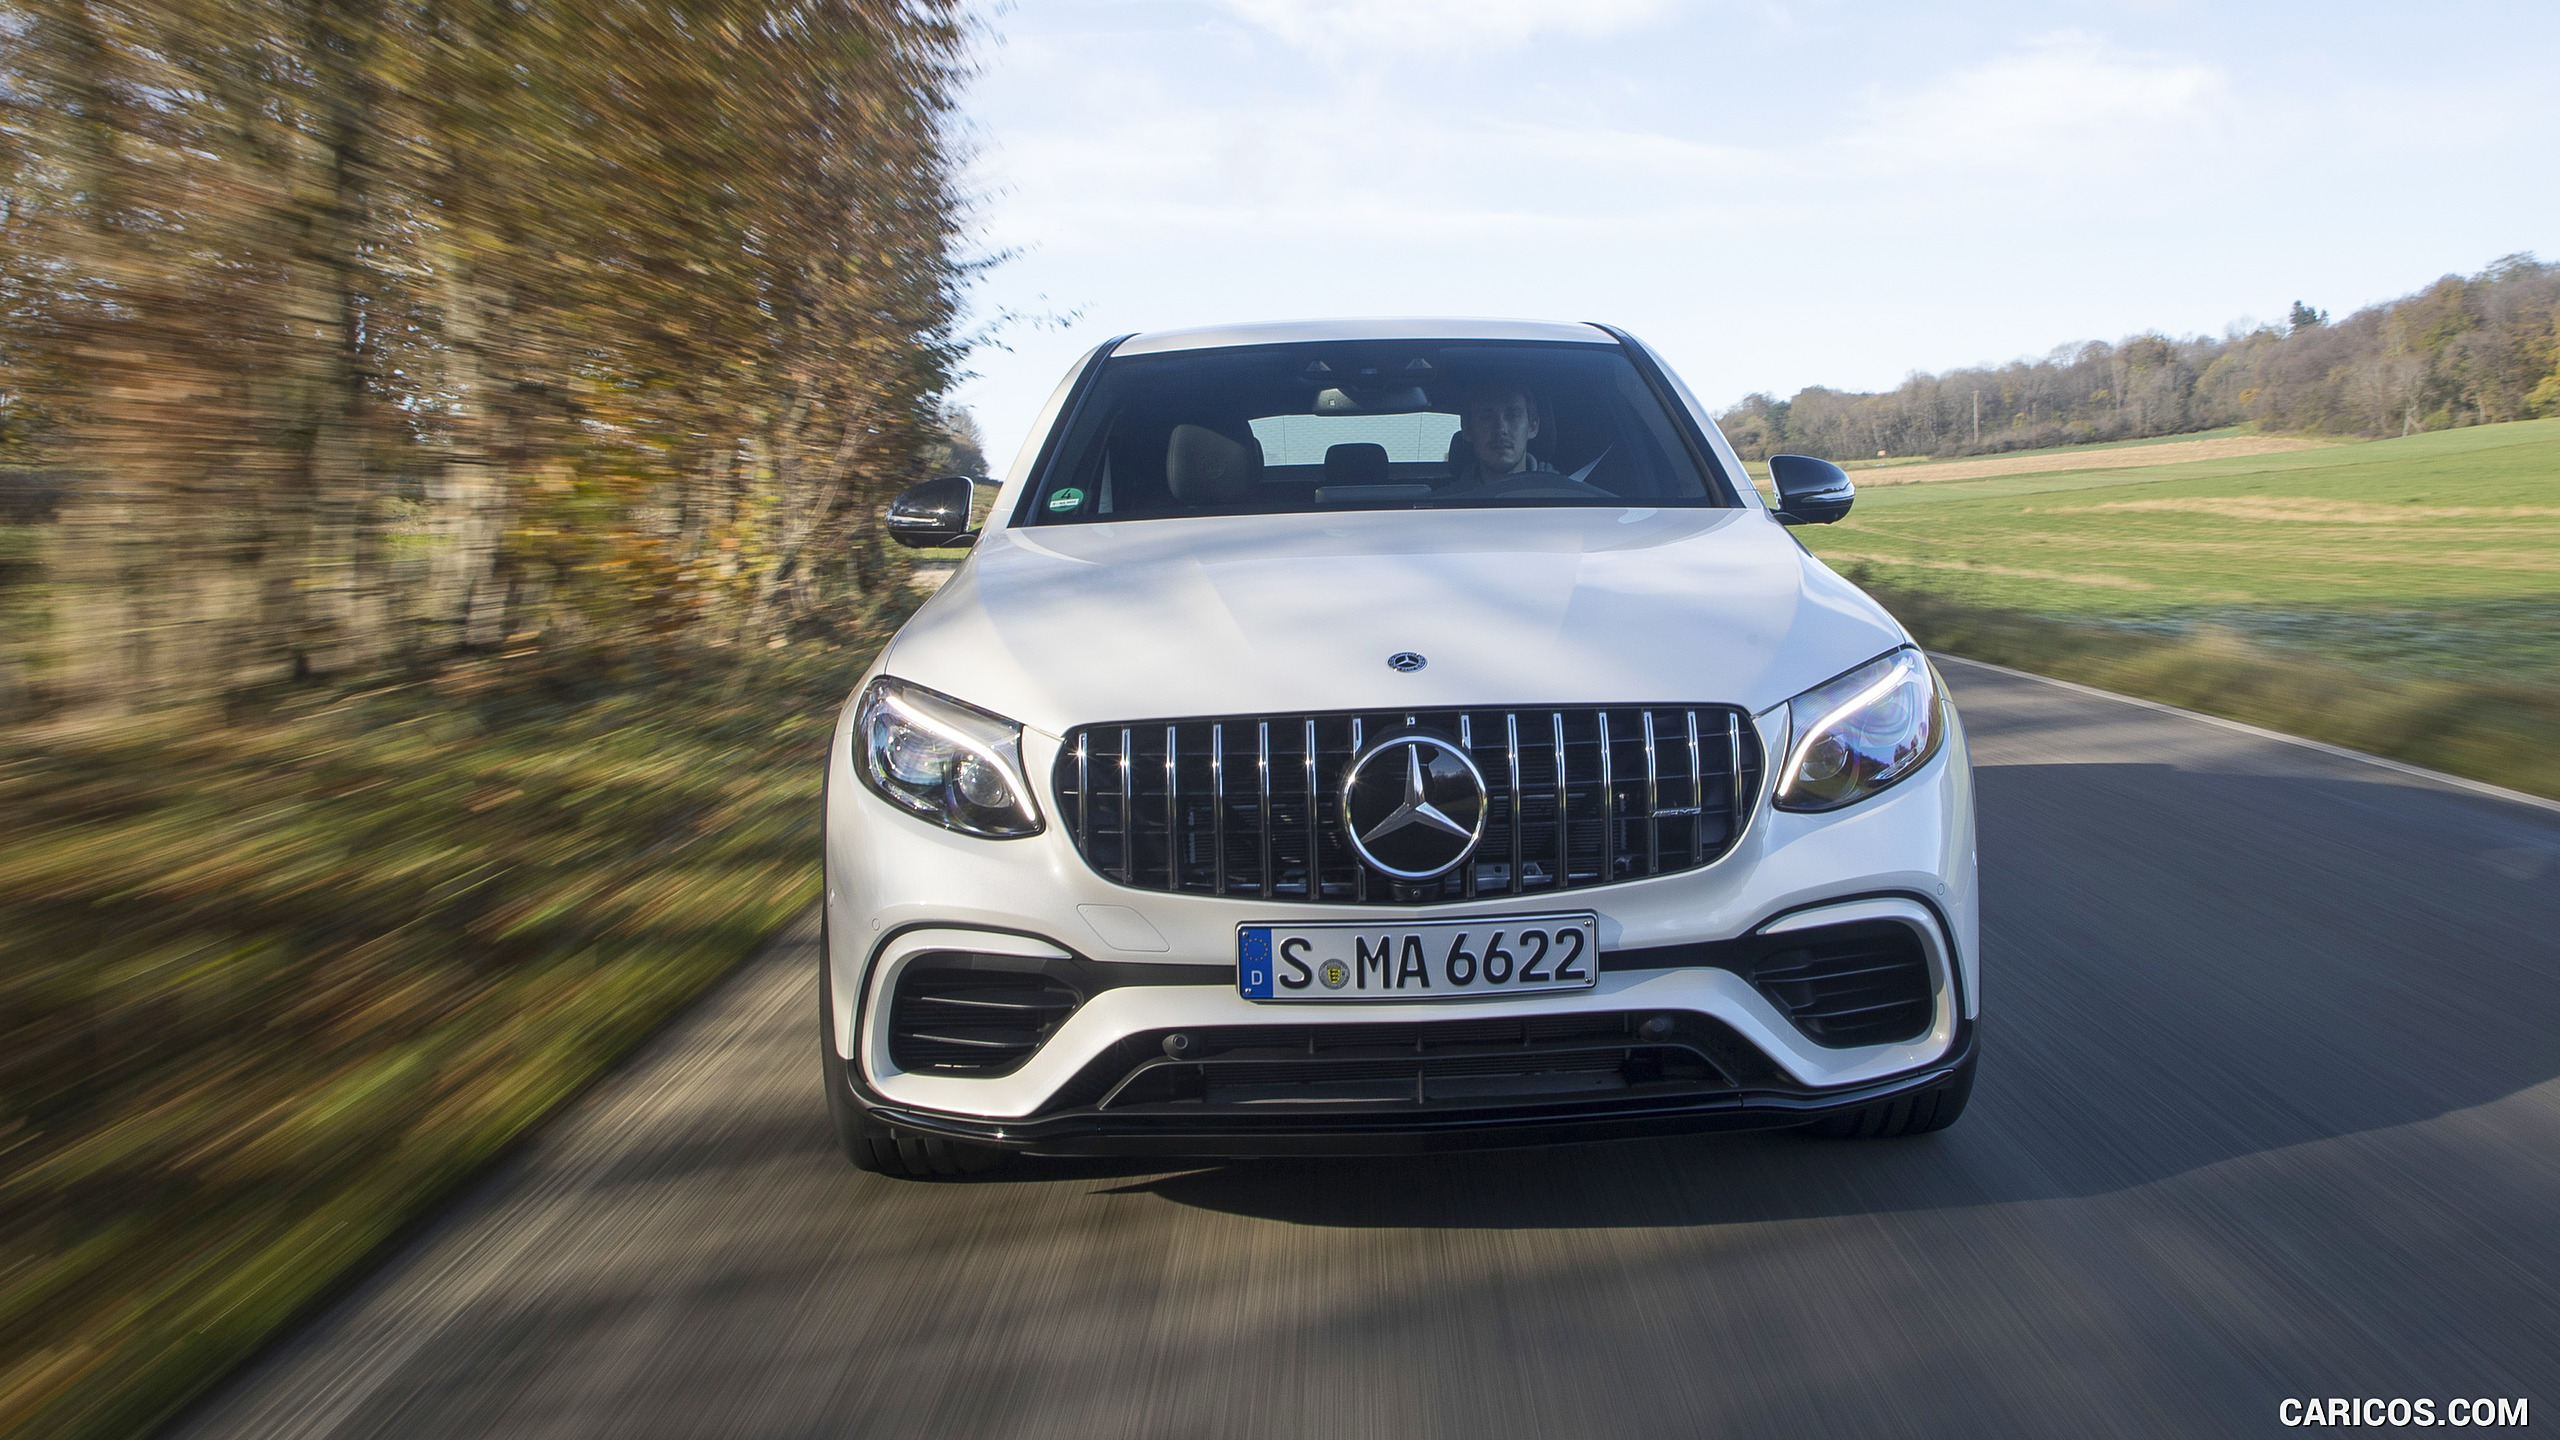 2018 Mercedes-AMG GLC 63 S Coupe - Front, #39 of 75